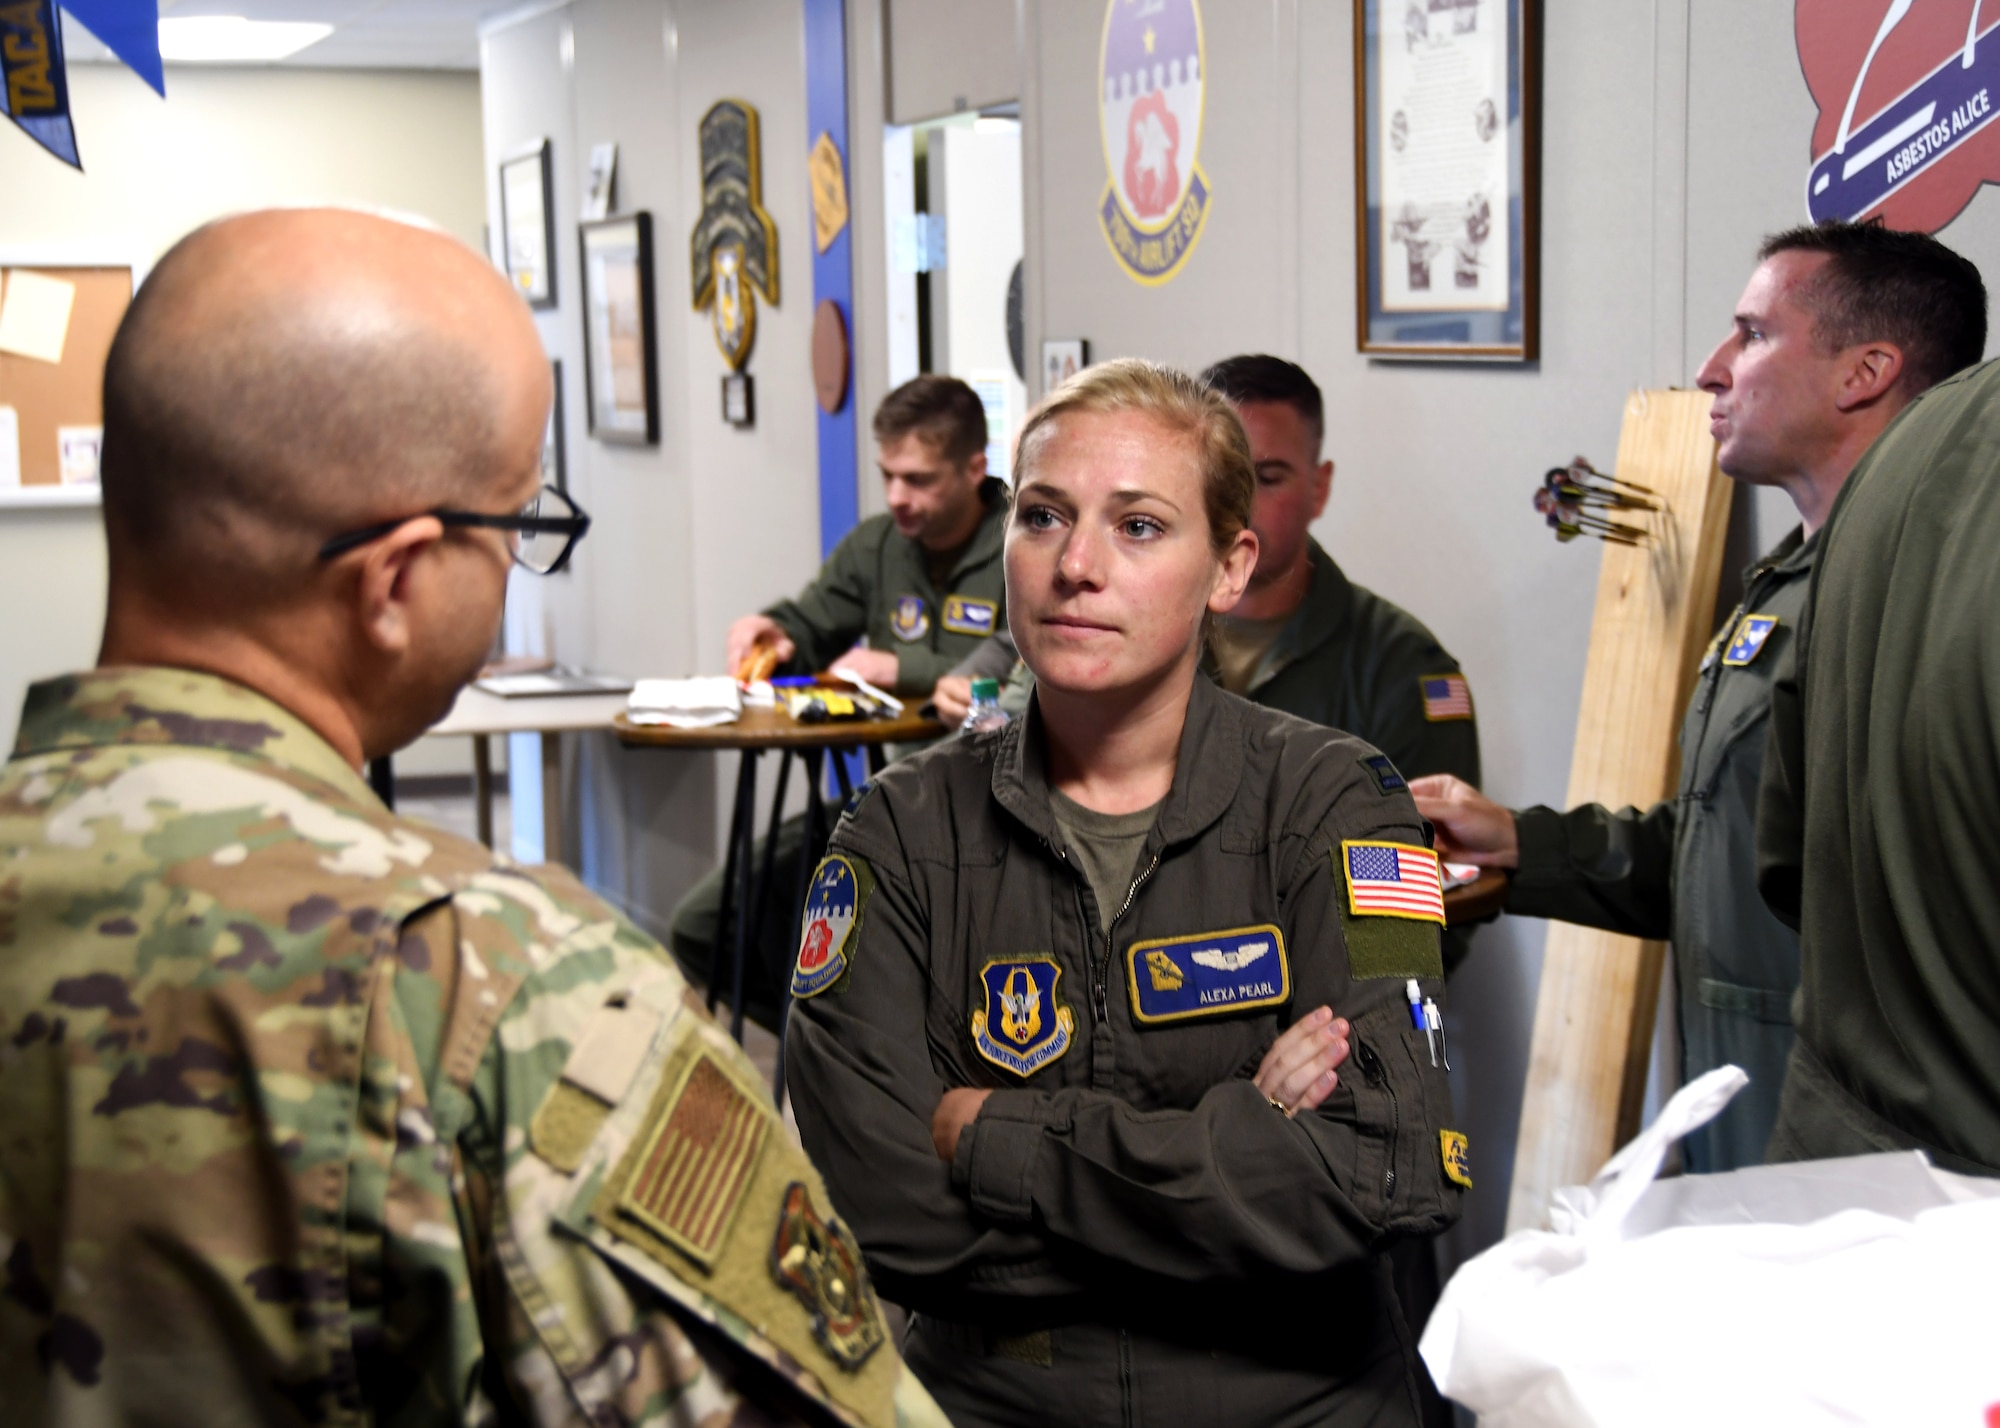 Capt. Alexa Pearl, 700th Airlift Squadron, speaks with Lt. Col. Antonio Ortiz-Guzman, 94th Airlift Wing chaplain, at Dobbins Air Reserve Base, Georgia, during a luncheon for Airmen.